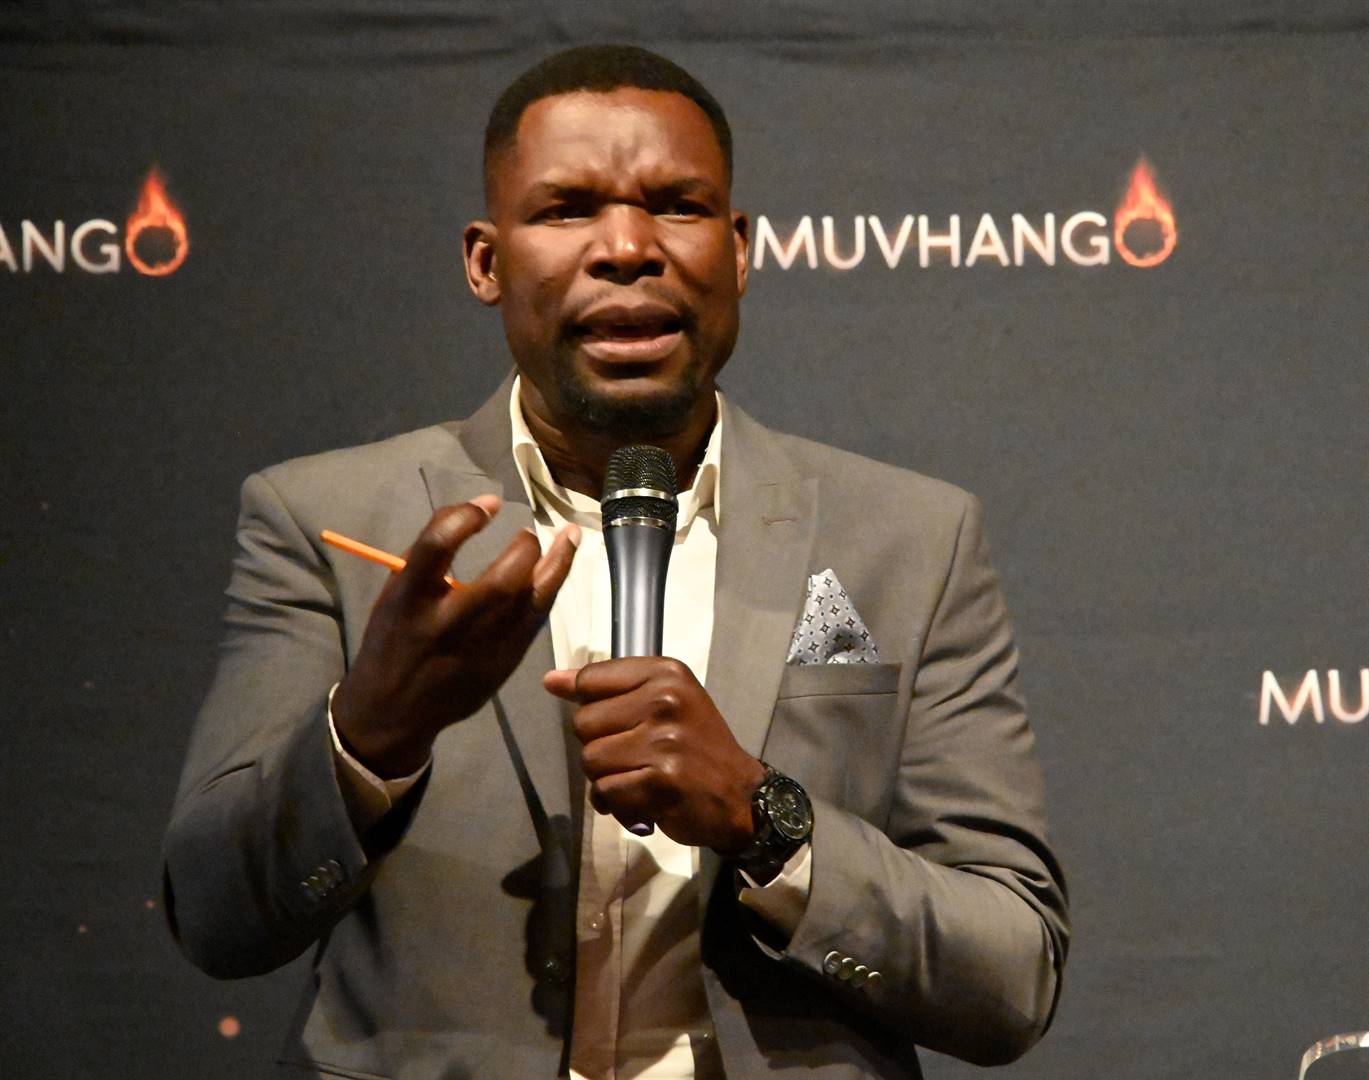 For actor Gabriel Temudzani, it was going to the gym in the morning and then dropping his kids off at school, which he missed doing during his many years on the set of popular Tshivhenda telenovela Muvhango.